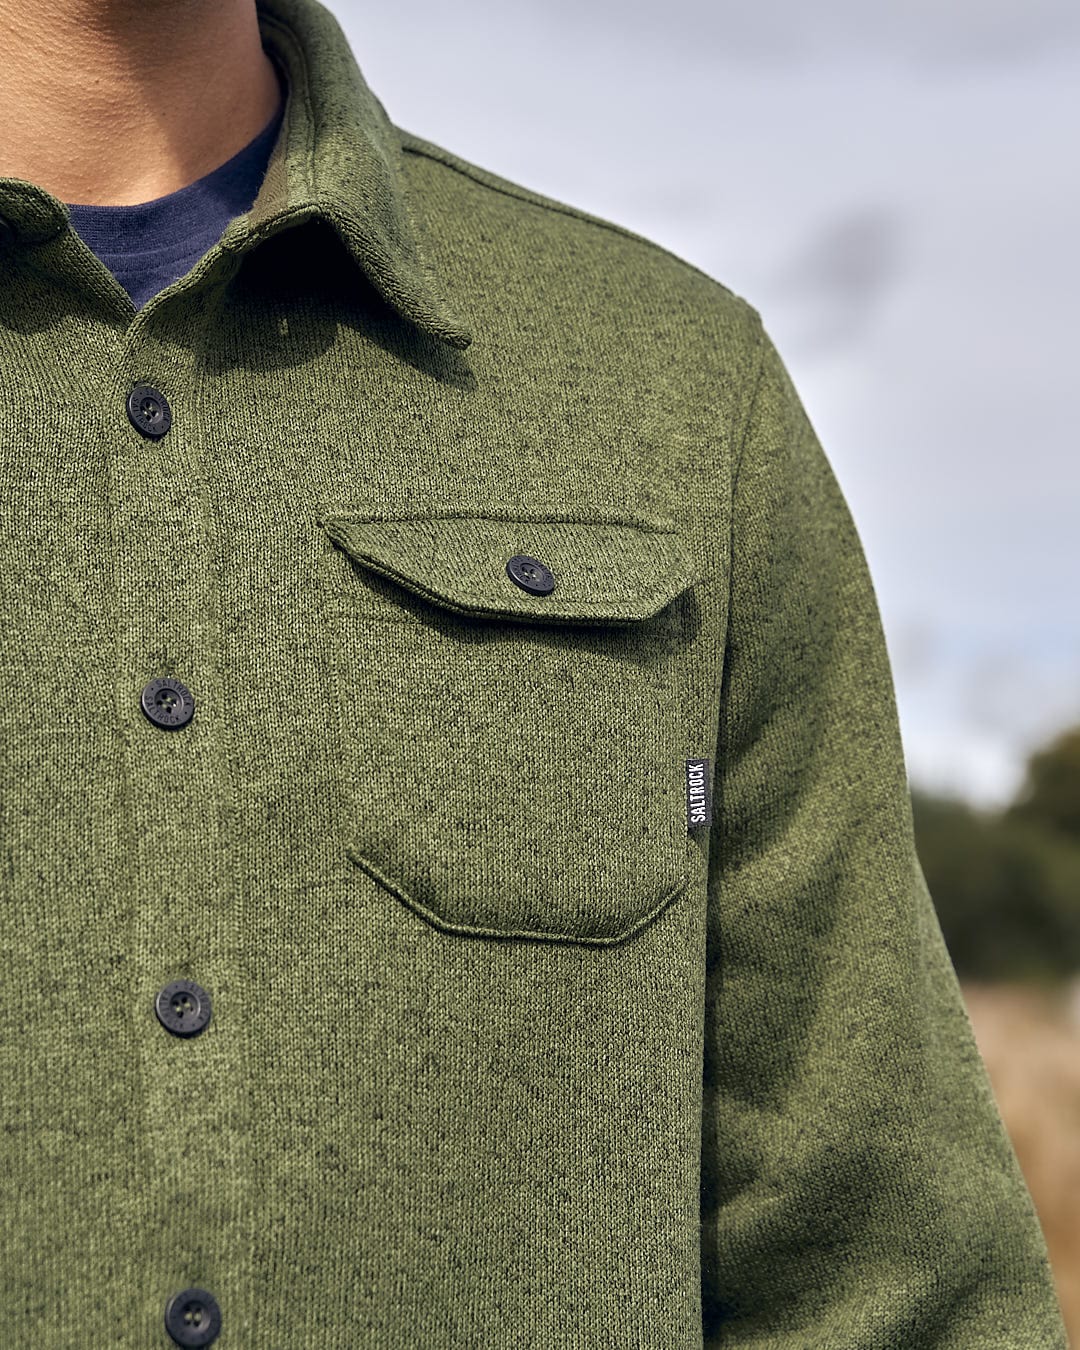 A man in a Levick - Mens Long Sleeve Shirt - Dark Green by Saltrock is standing in a field.